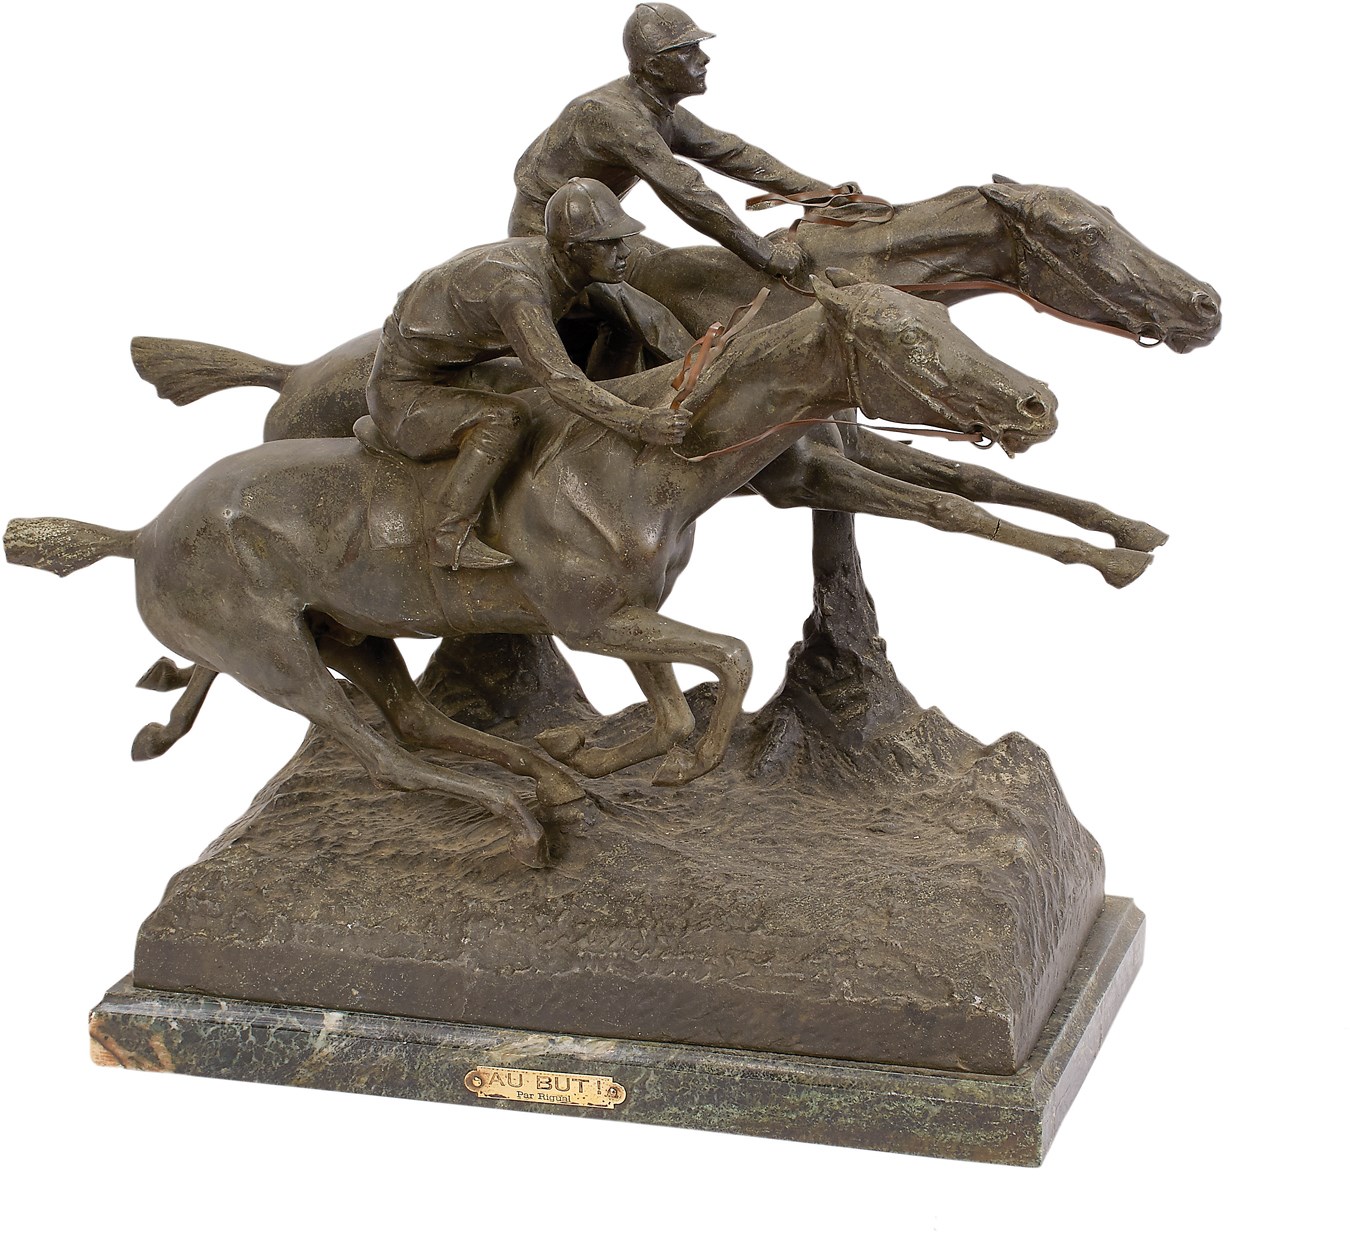 - Resplendent 1890s French Horse Racing Statue By Pedro Ramon Jose Rigual